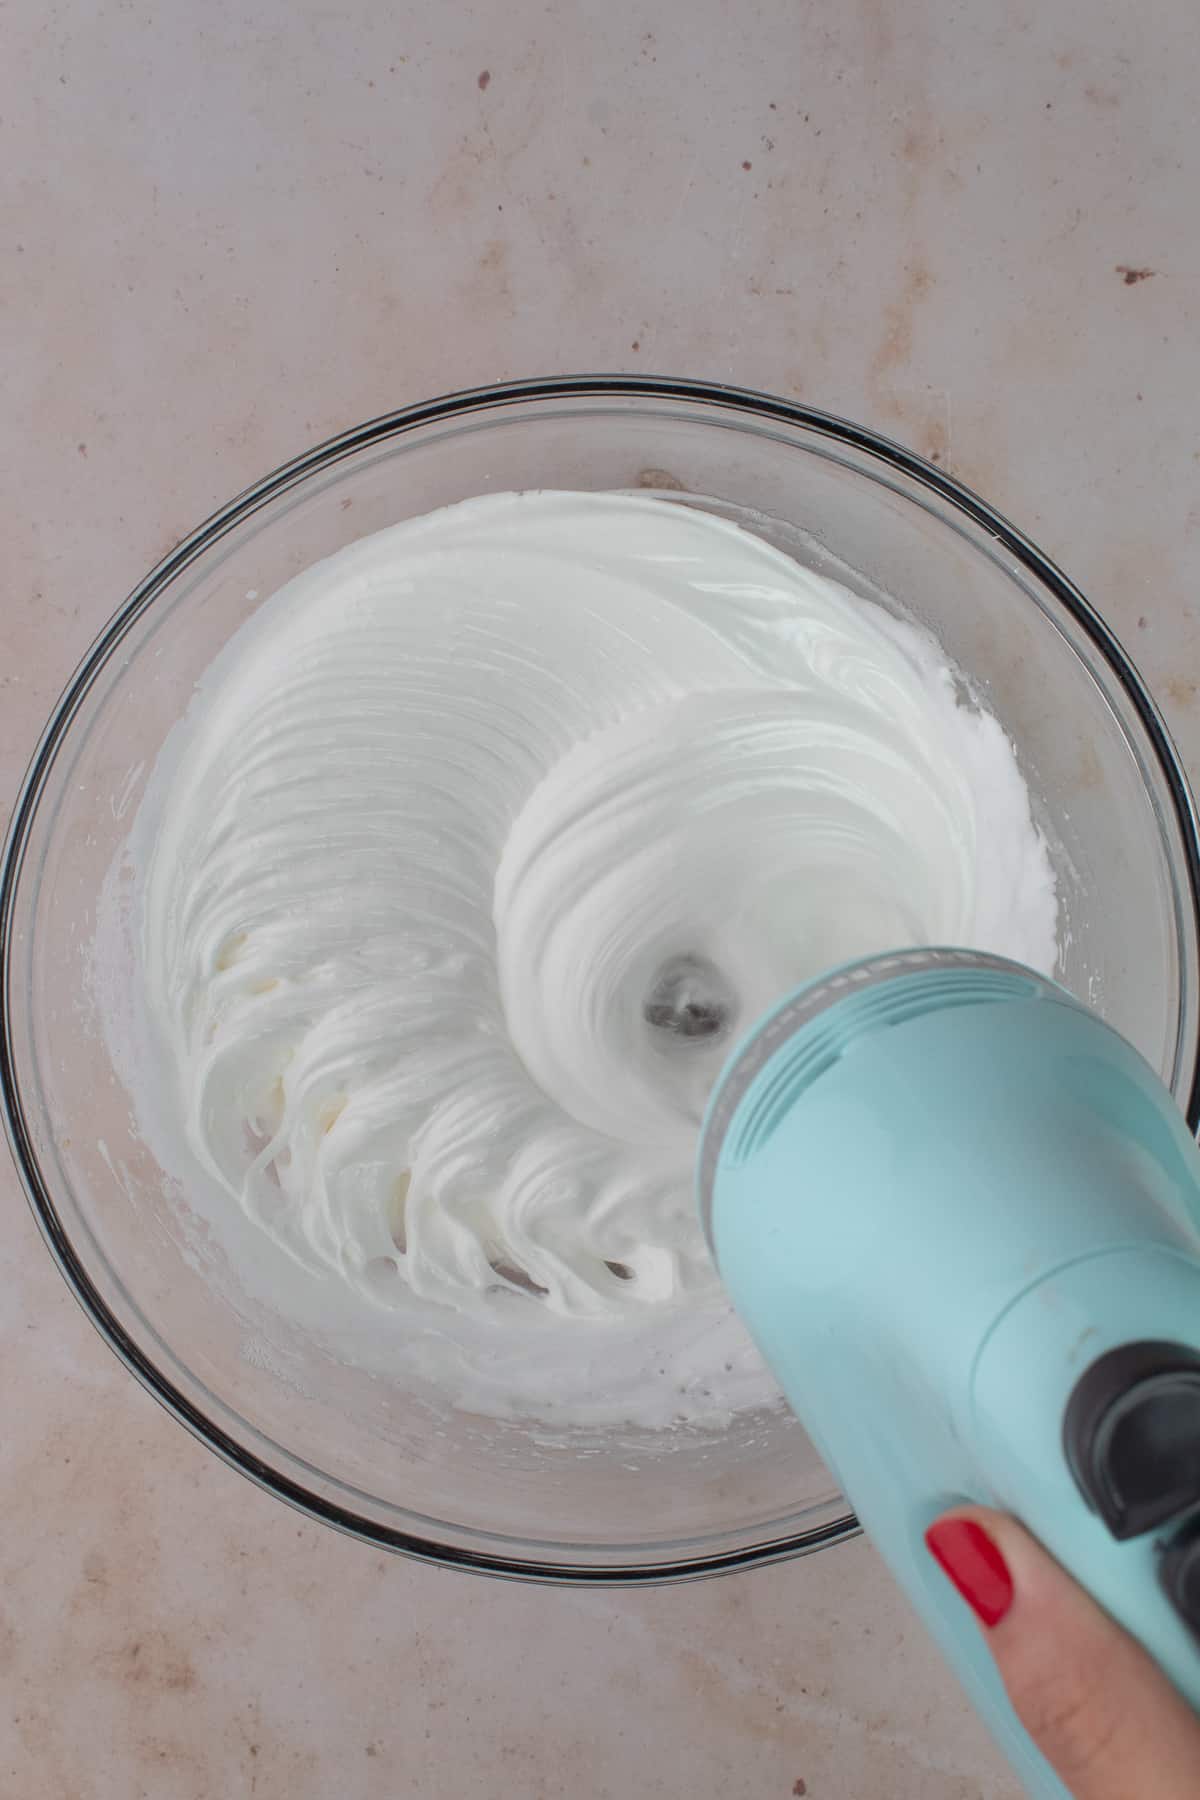 Egg white mixture is whipped to still peaks